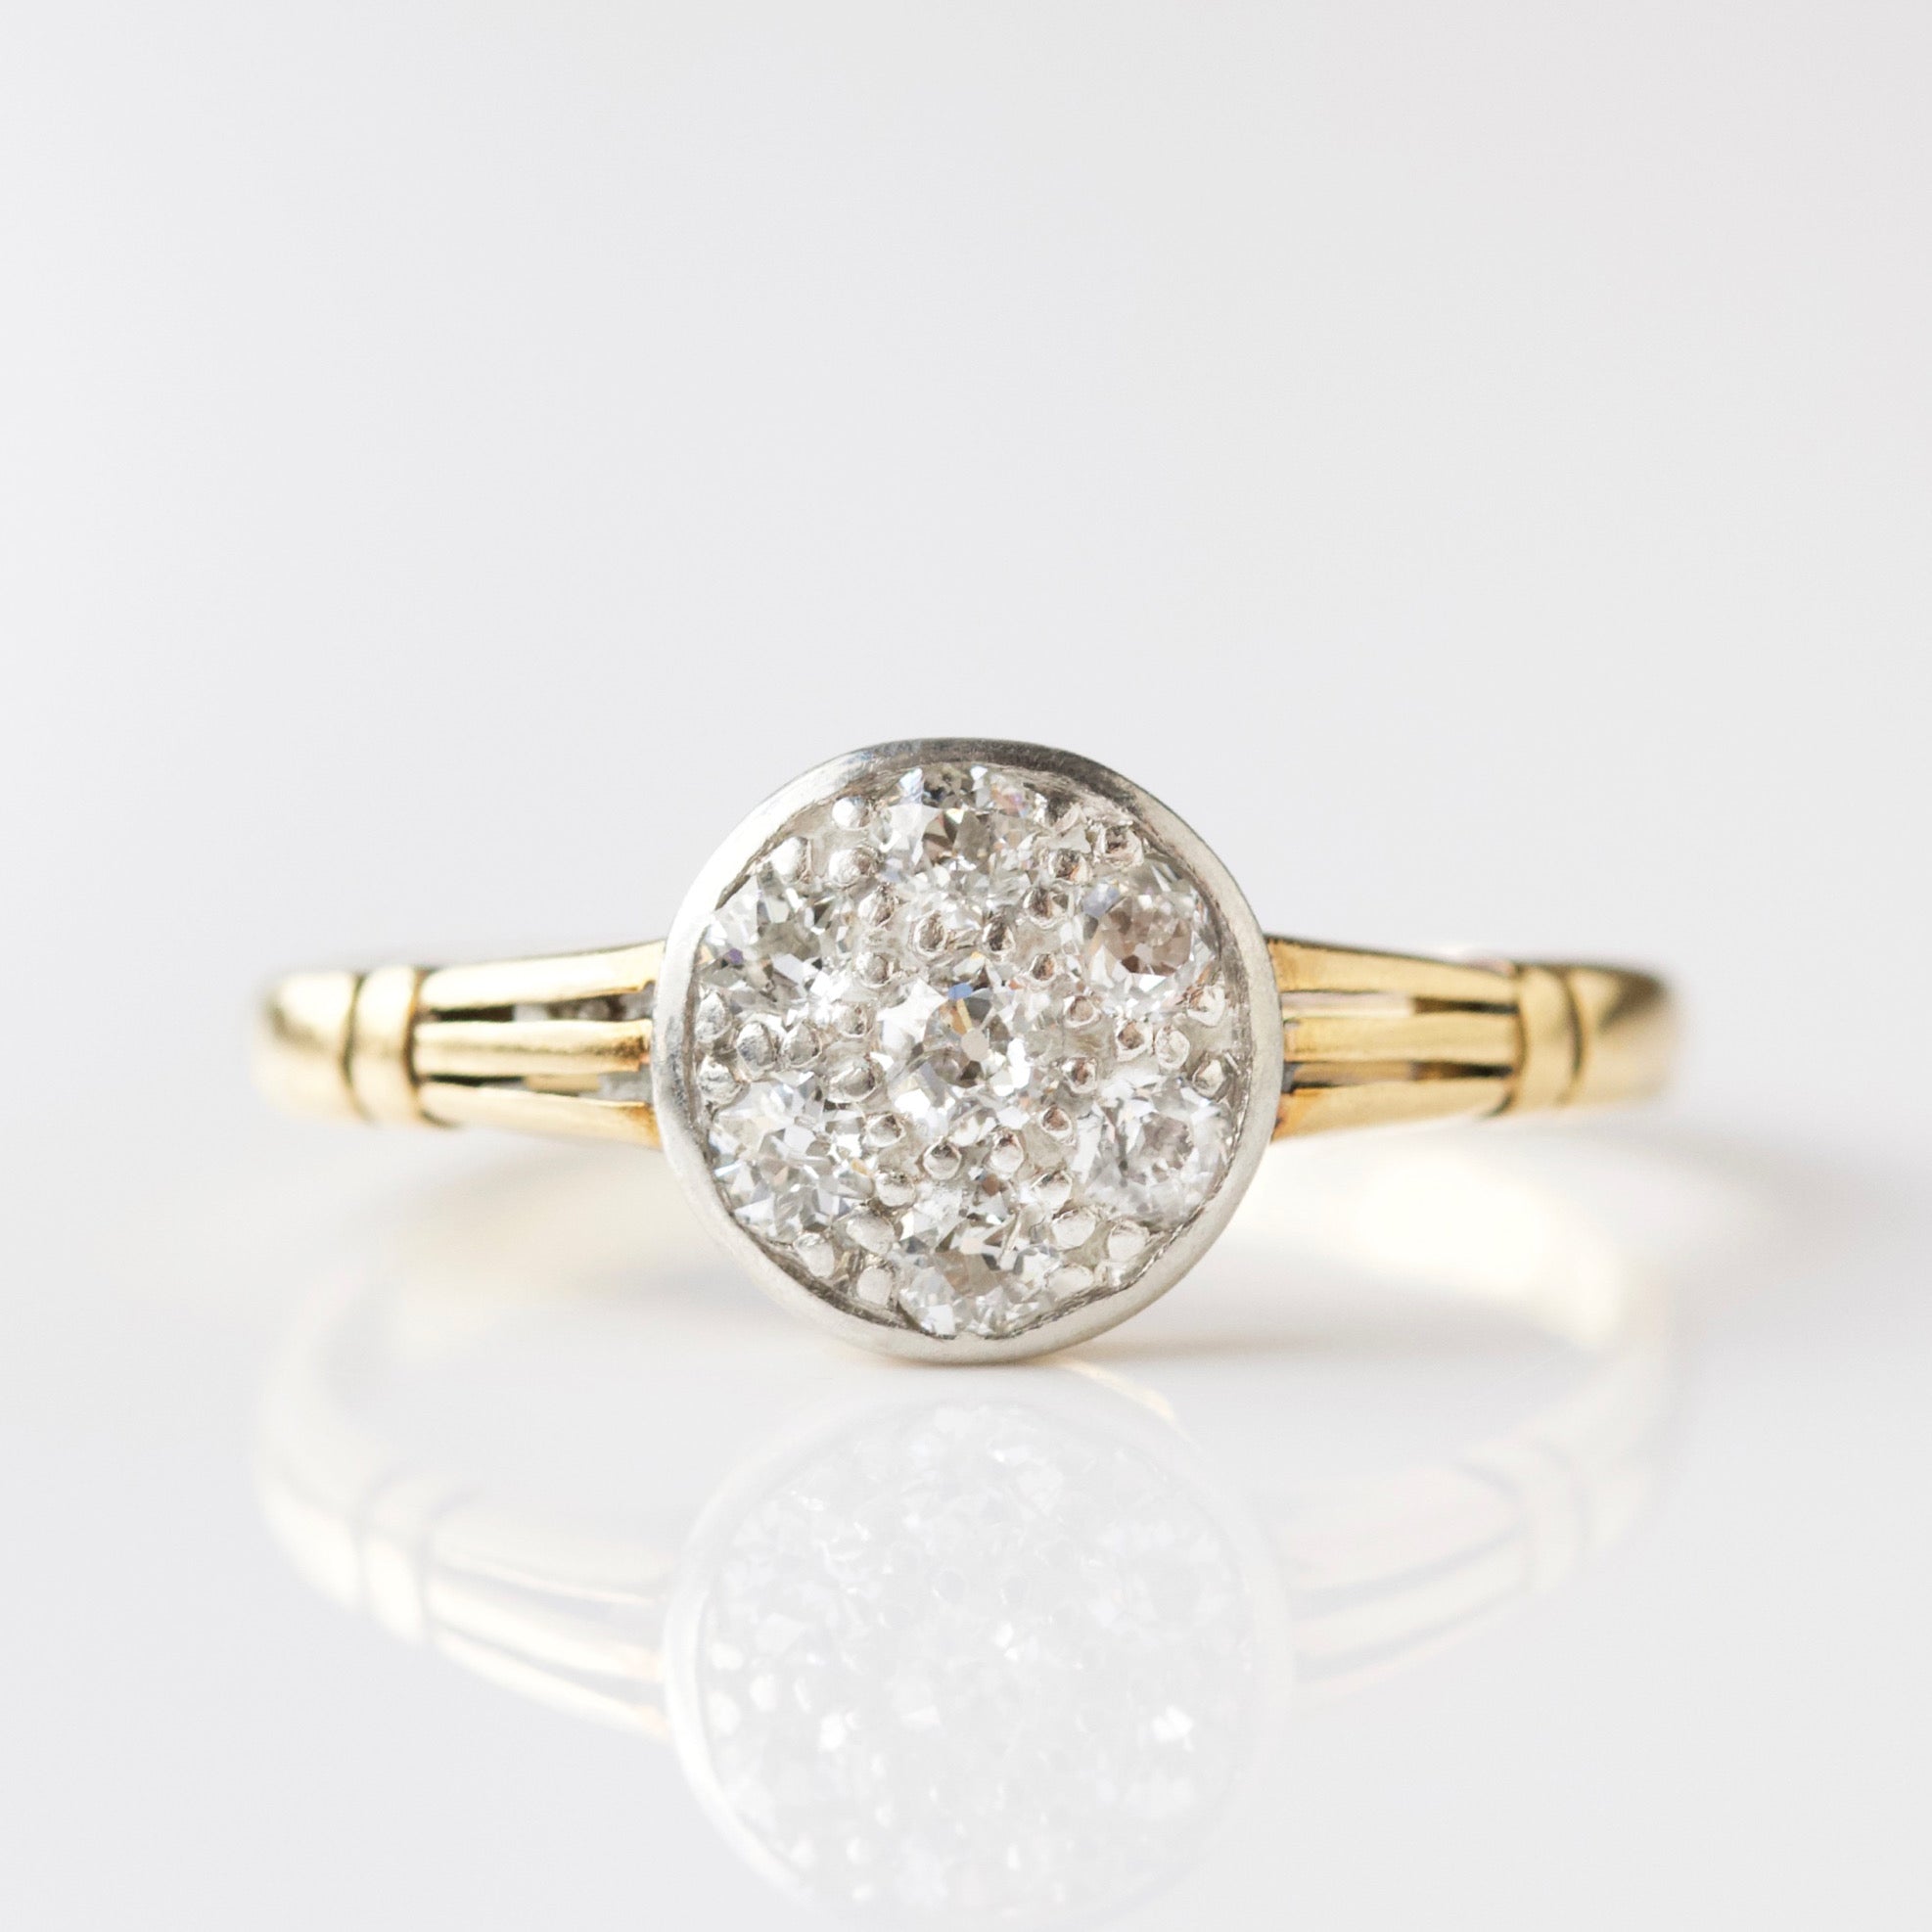 Diamond vintage ring in solid gold